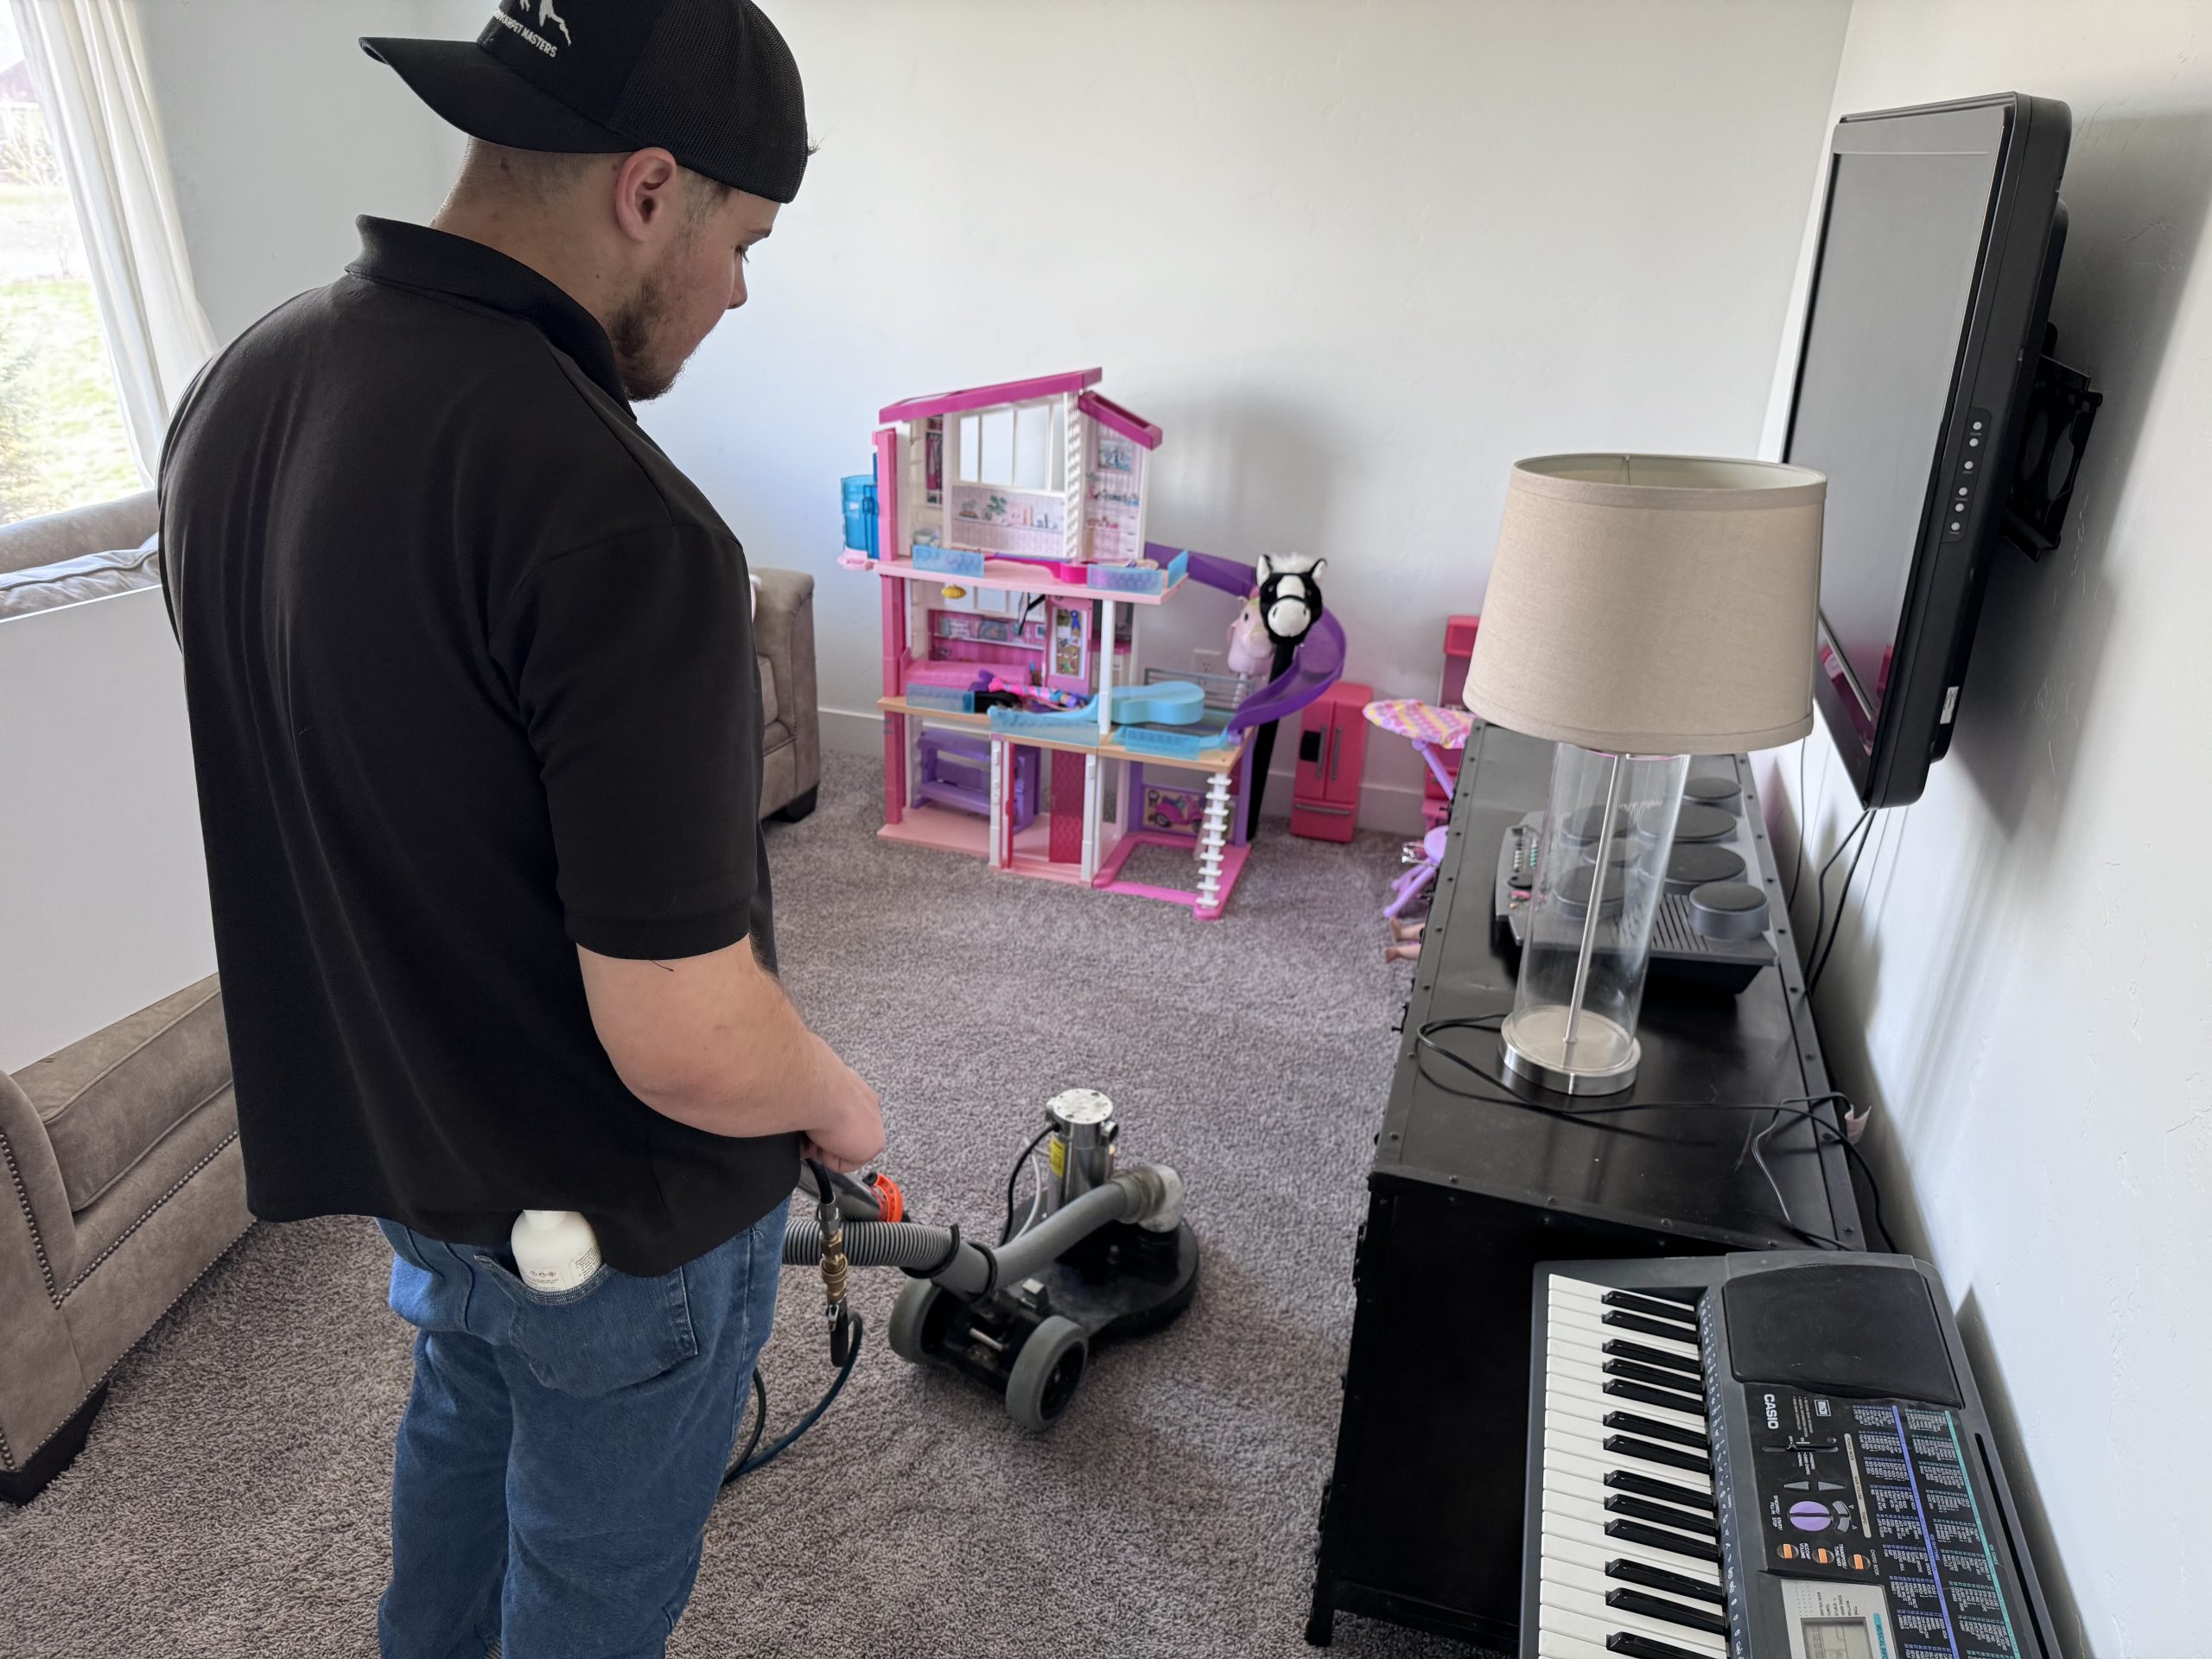 colorado carpet masters technician deliberately carpet cleaning in commerce city around various childrens toys